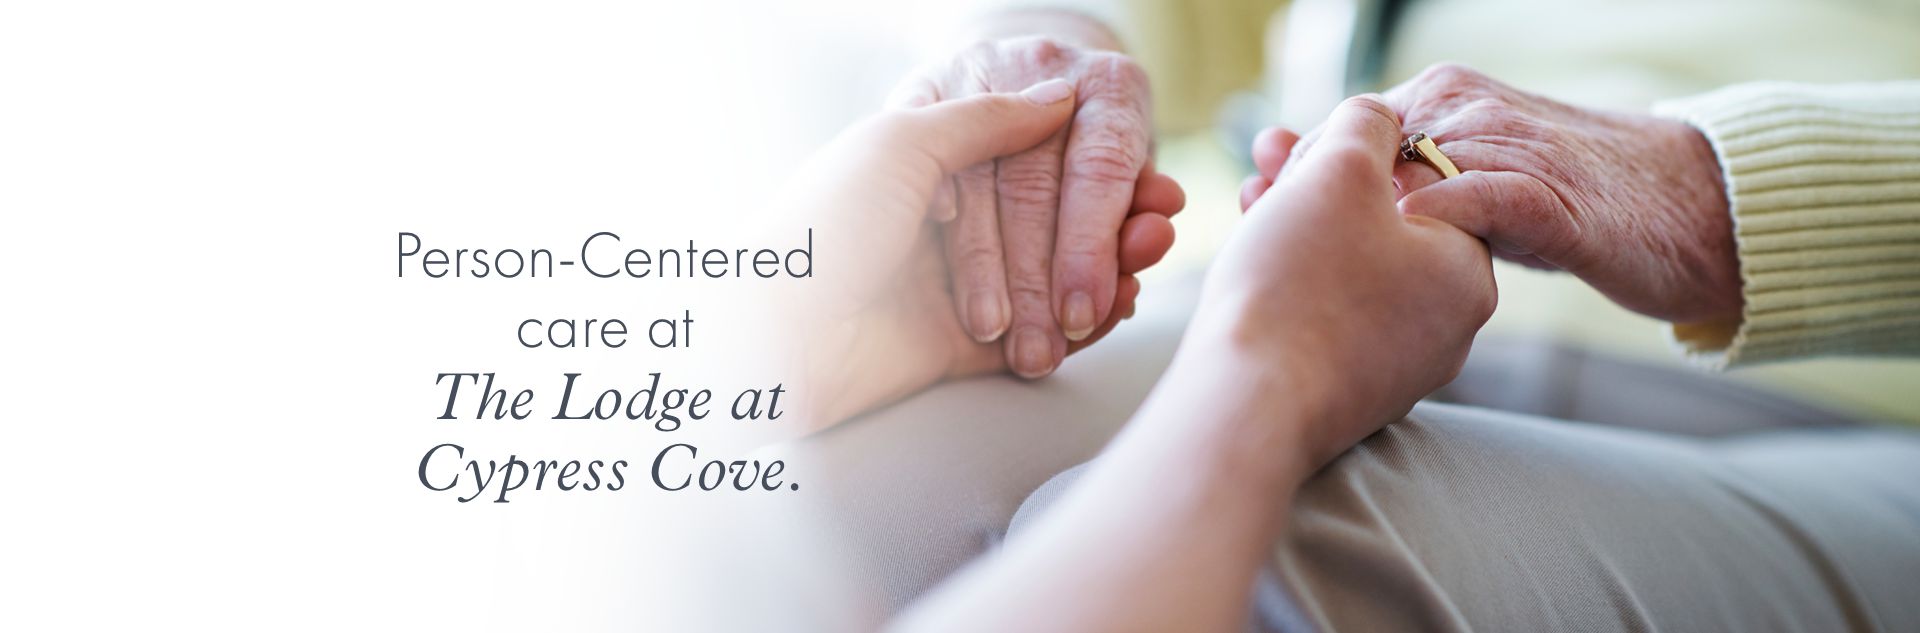 Person-Centered care at  The Lodge at Cypress Cove.